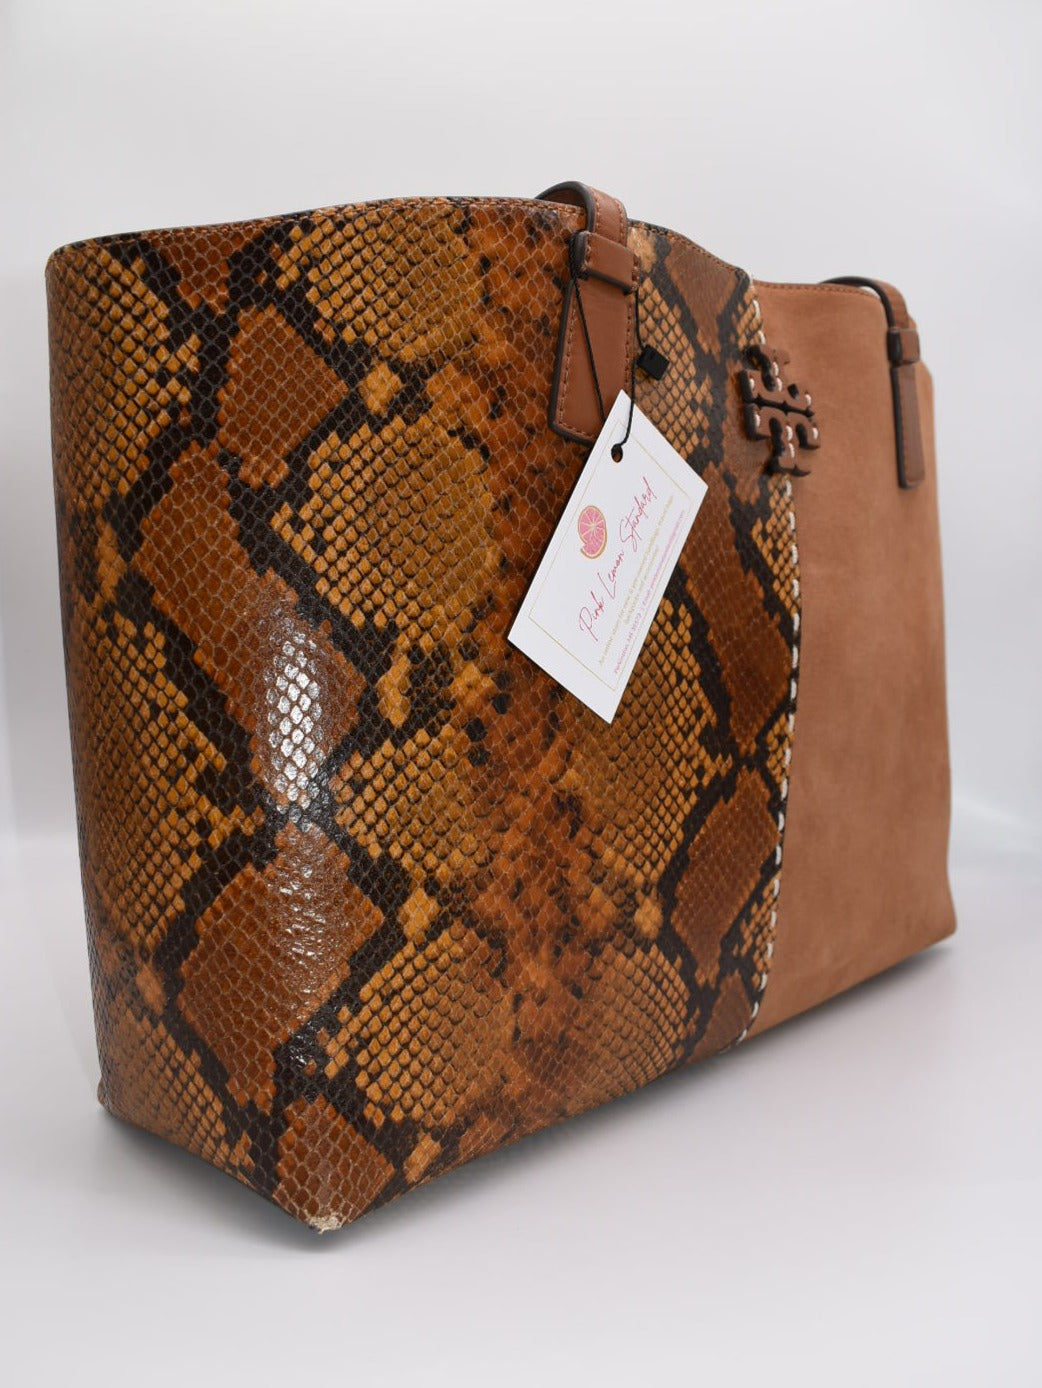 Tory Burch  McGraw Snake-Embossed Leather & Suede Tote in Dark Caramel